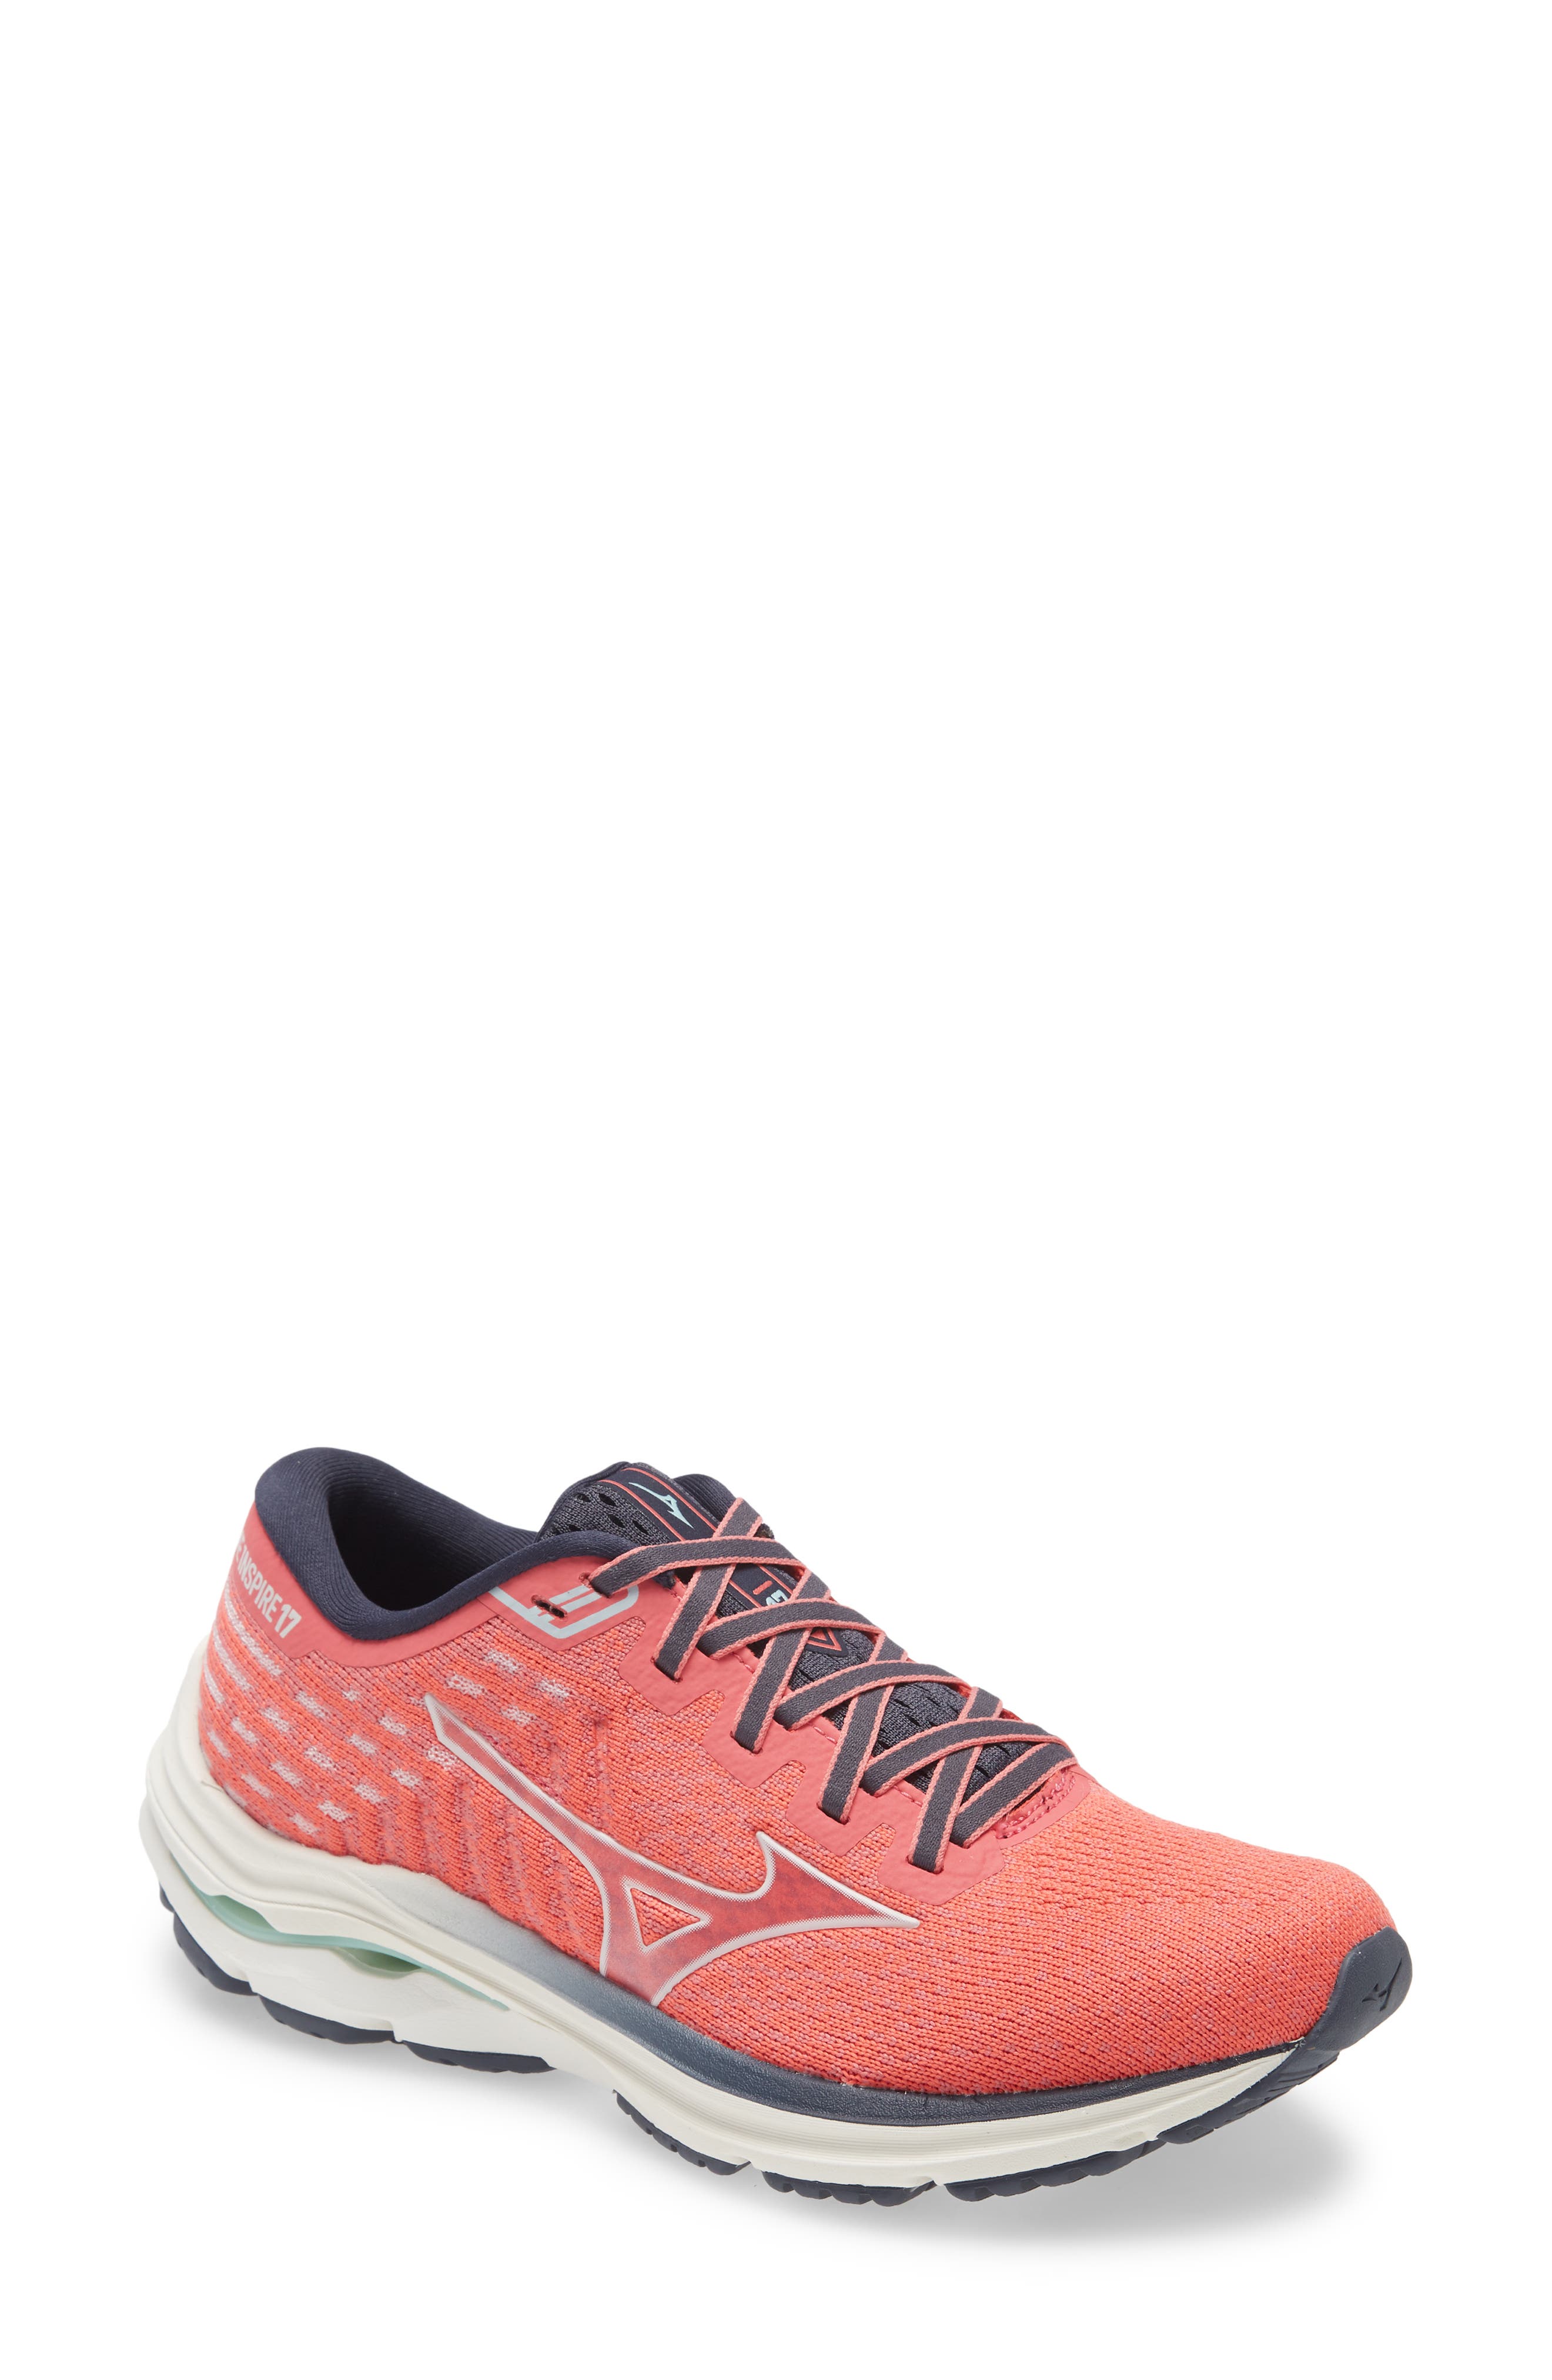 mizuno athletic shoes for women